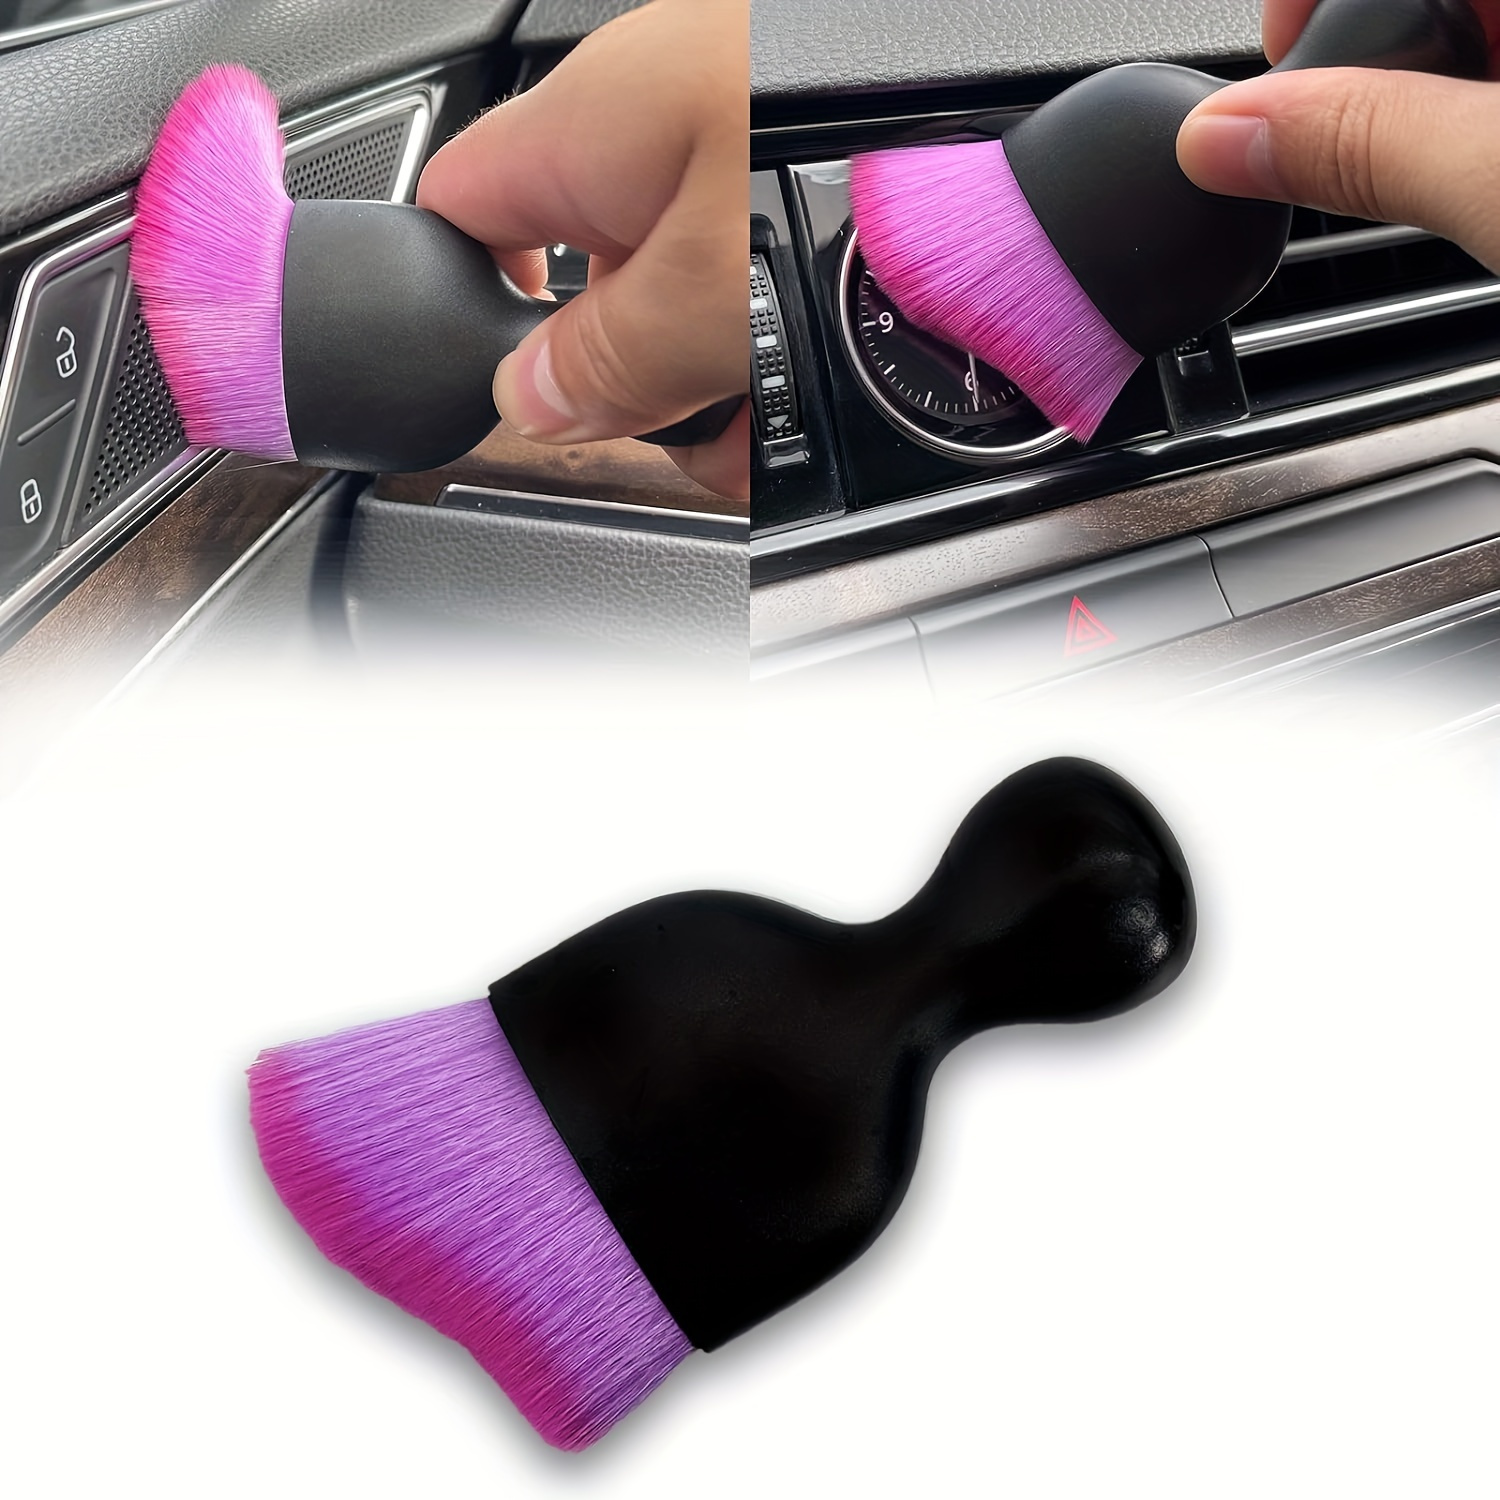 

Soft Bristle Car Detailing Brush - Versatile Dust Cleaner For Interior, Air Vents & Furniture - No Power Needed